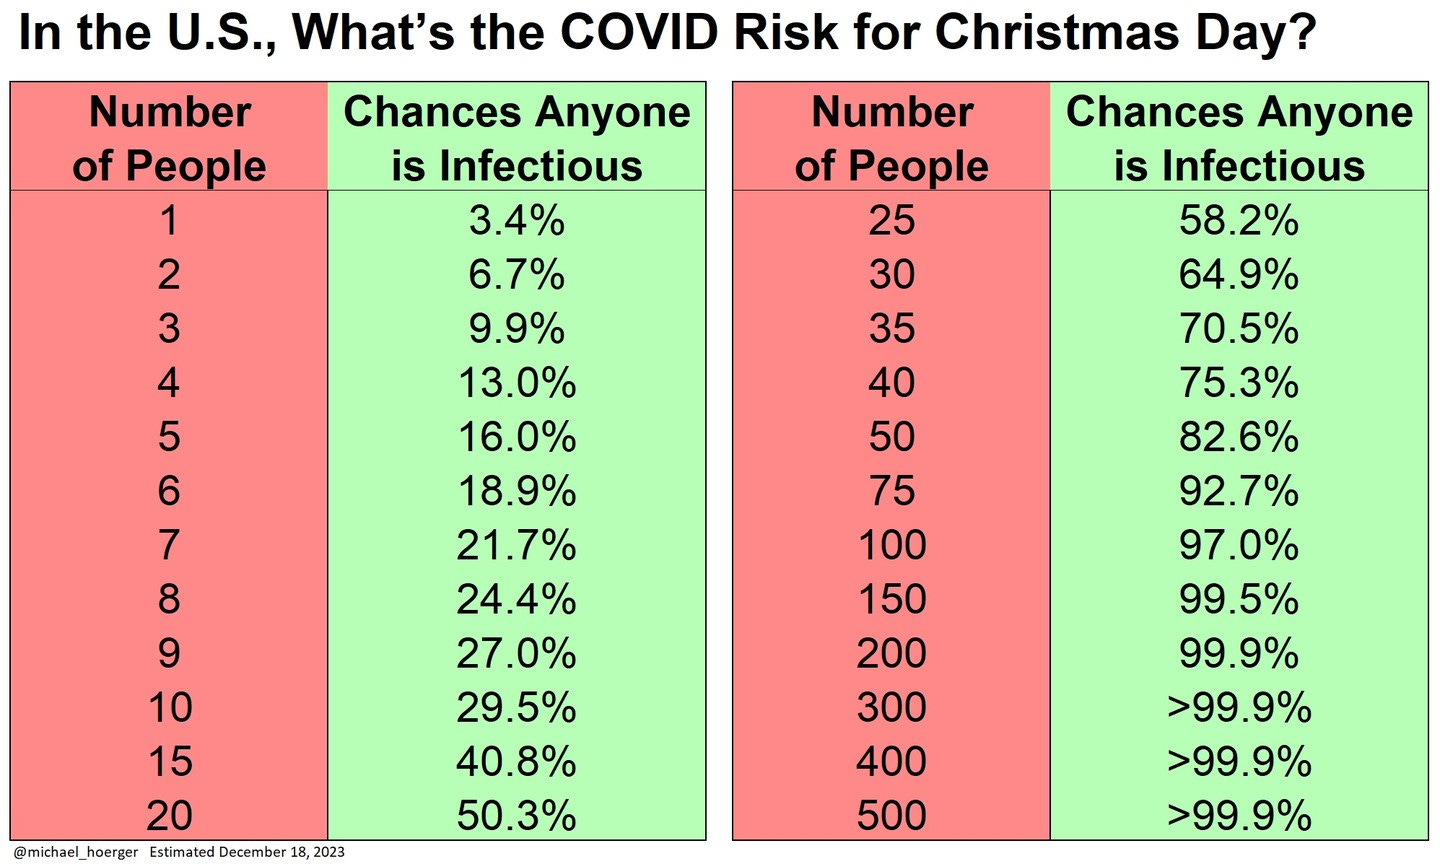 Chart: In the U.S., What's the COVID Risk for Christmas Day?Number of People  |  Chances Anyone is Infectious	1	3.4%2	6.7%3	9.9%4	13.0%5	16.0%6	18.9%7	21.7%8	24.4%9	27.0%10	29.5%15	40.8%20	50.3%25	58.2%30	64.9%35	70.5%40	75.3%50	82.6%75	92.7%100	97.0%150	99.5%200	99.9%300	>99.9%400	>99.9%500	>99.9%